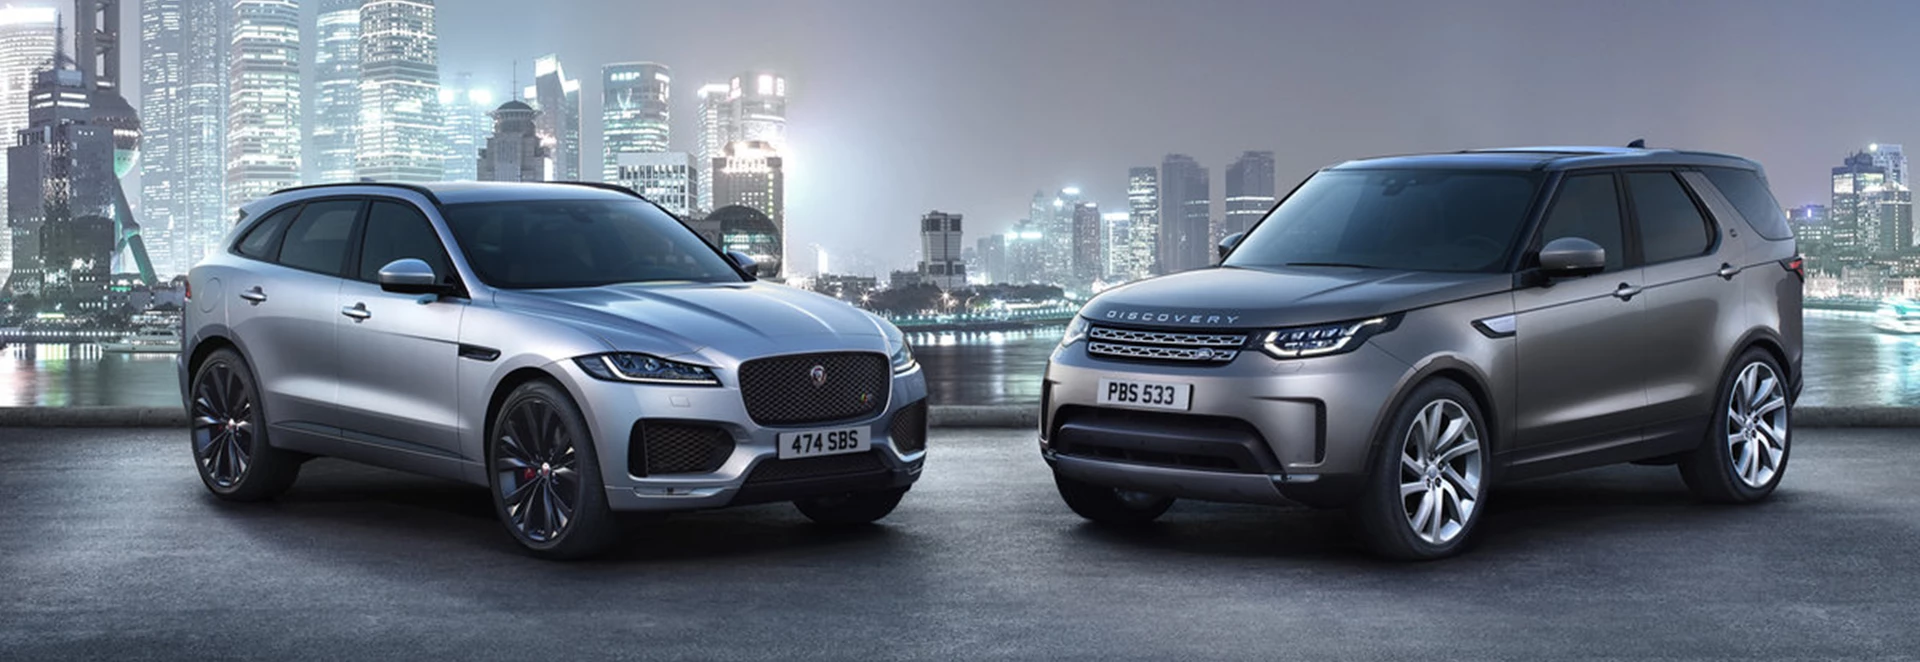 Jaguar Land Rover to launch ride-sharing service